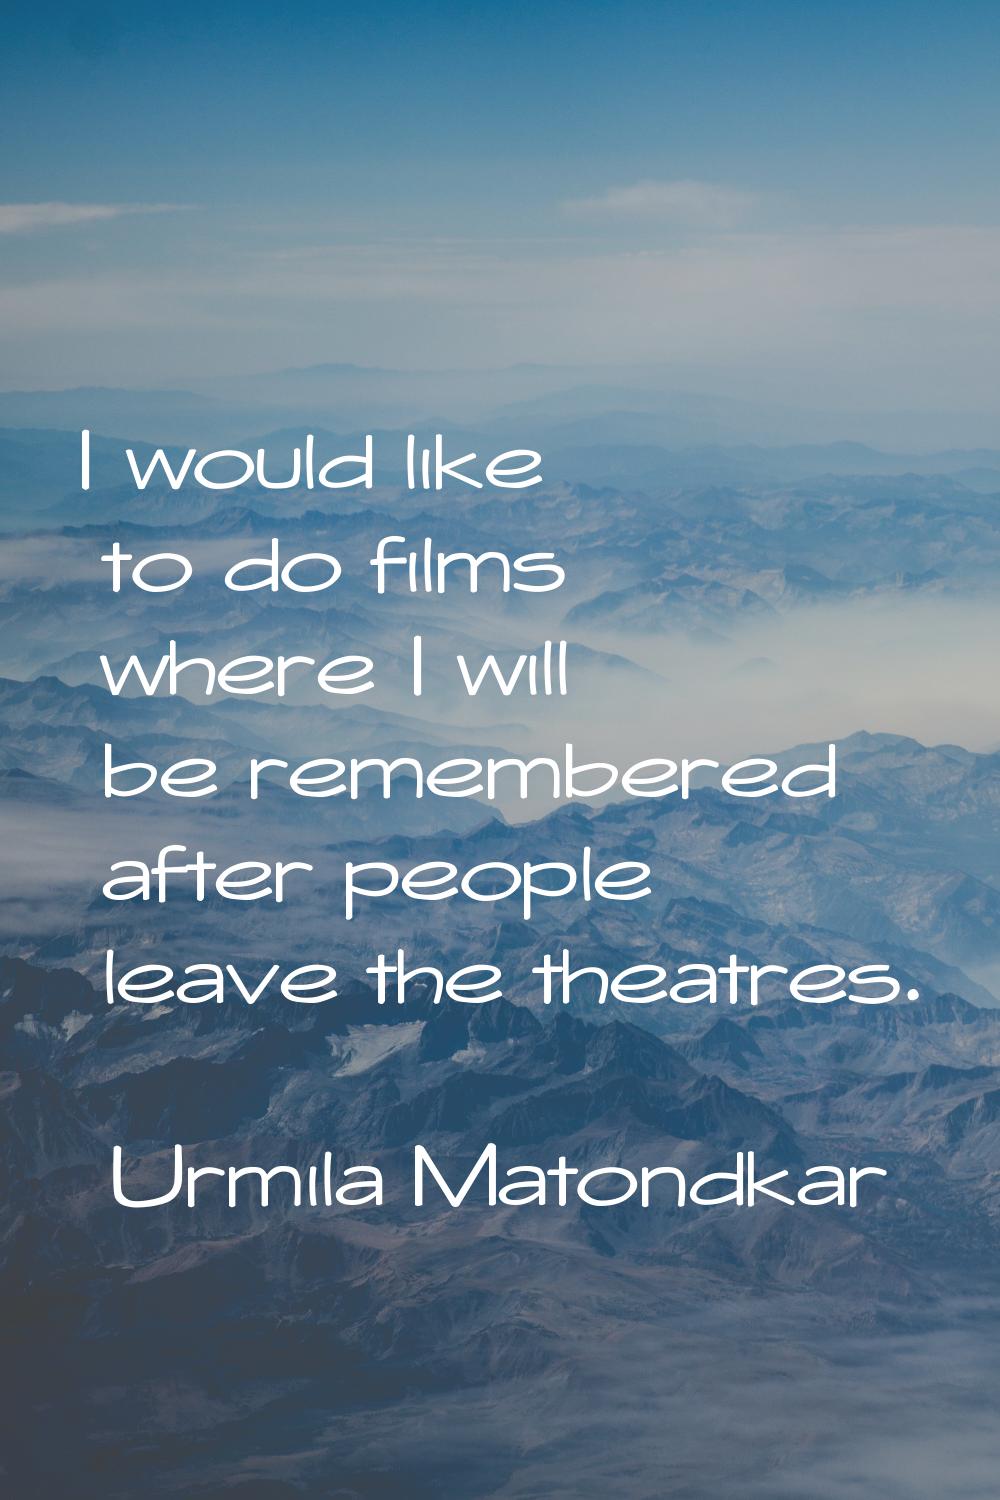 I would like to do films where I will be remembered after people leave the theatres.